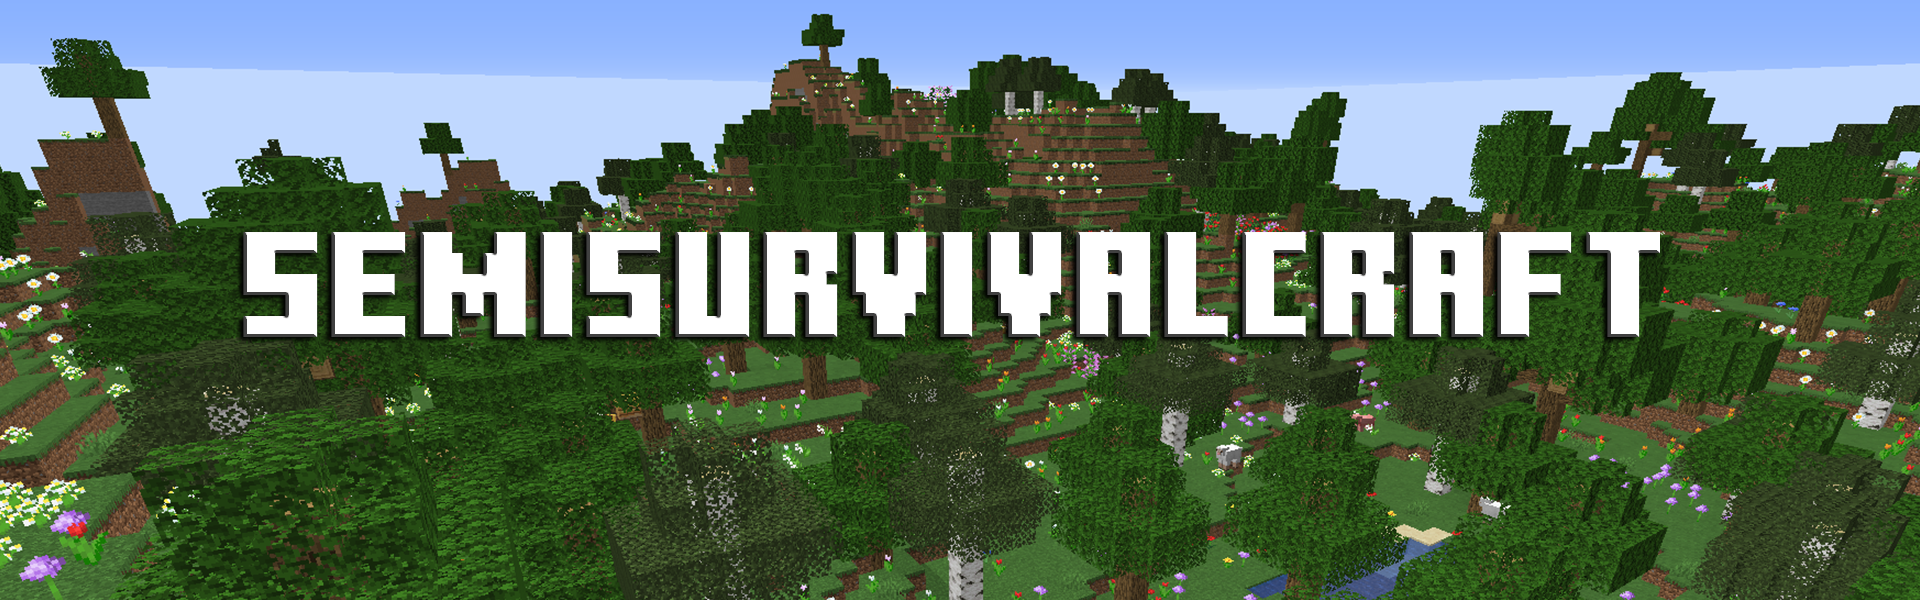 Survivalcraft Reporting Inappropriate Content